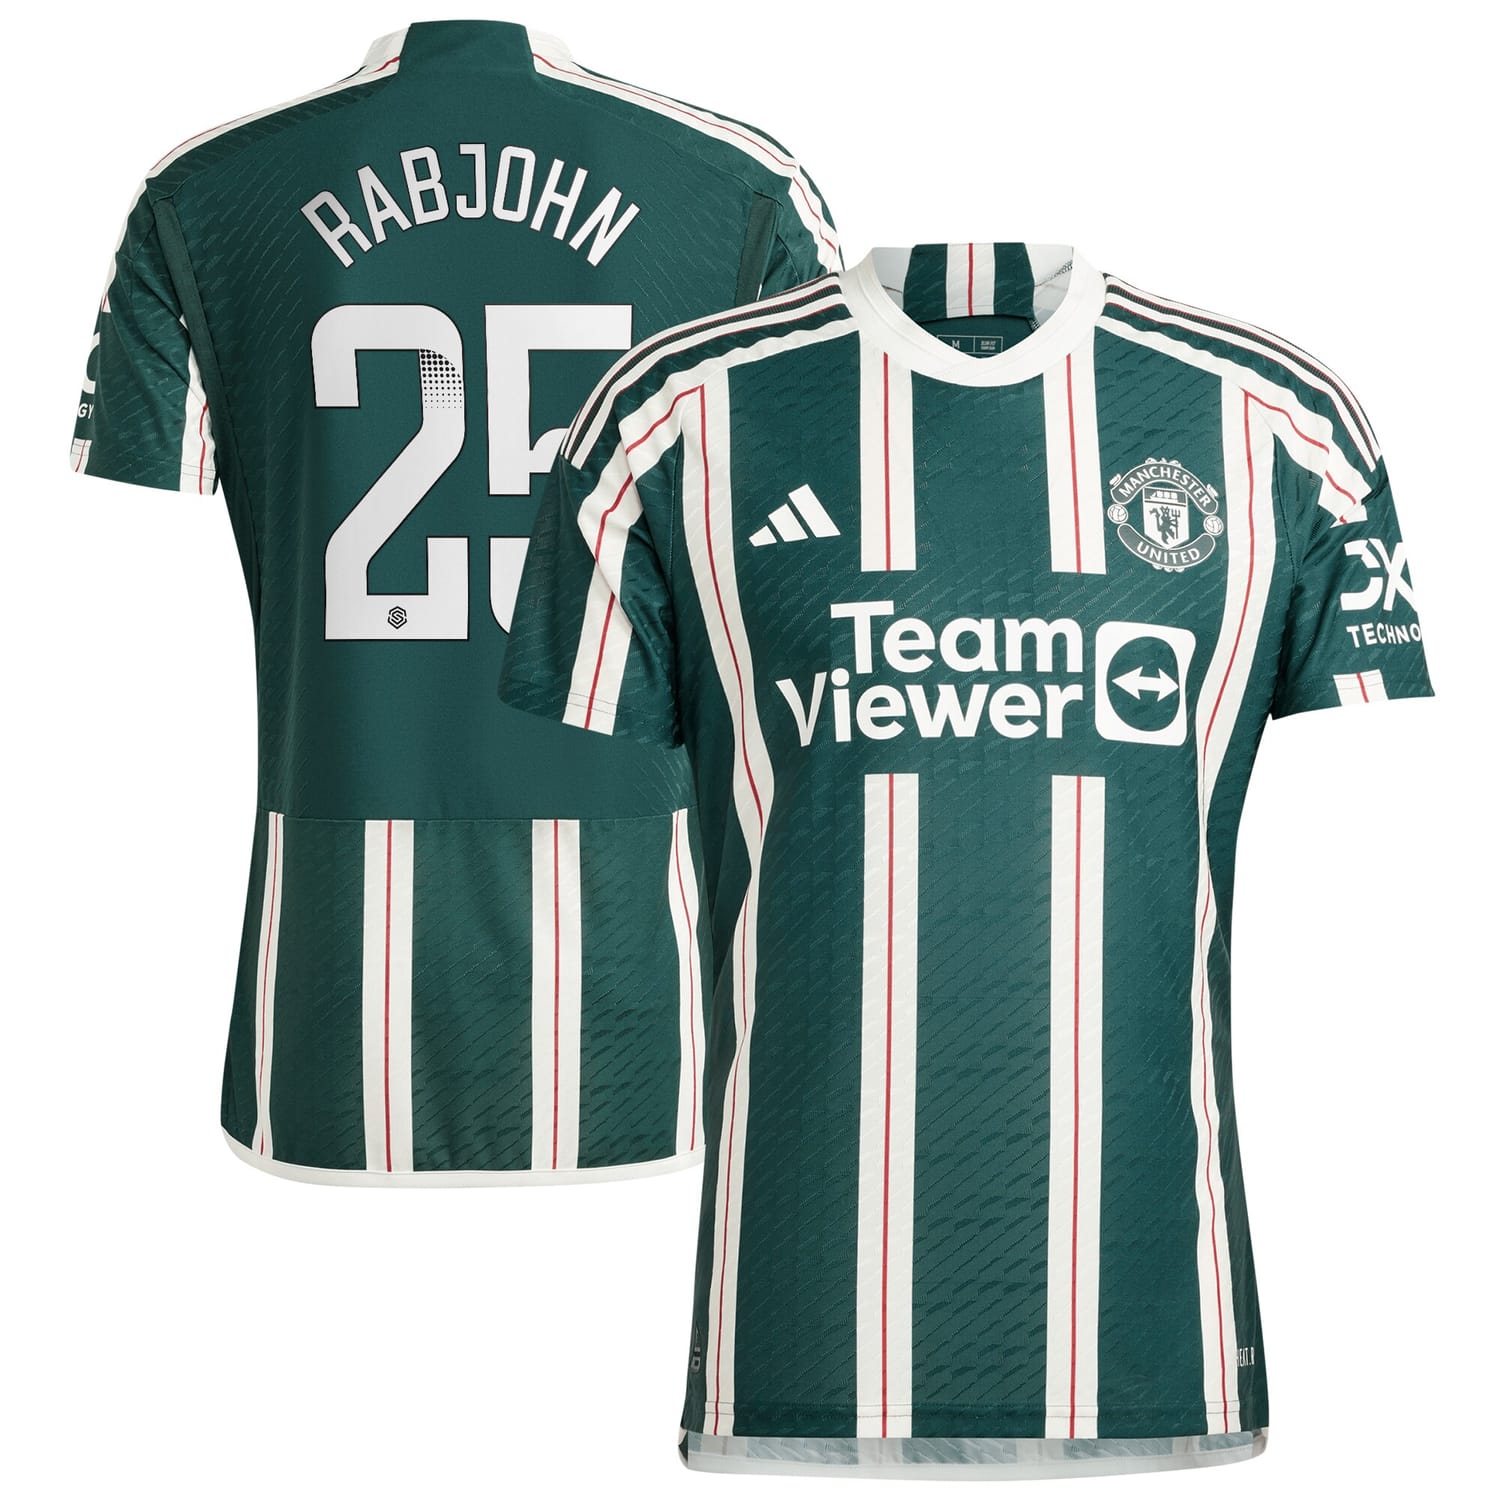 Premier League Manchester United Away WSL Authentic Jersey Shirt 2023-24 player Evie Rabjohn printing for Men